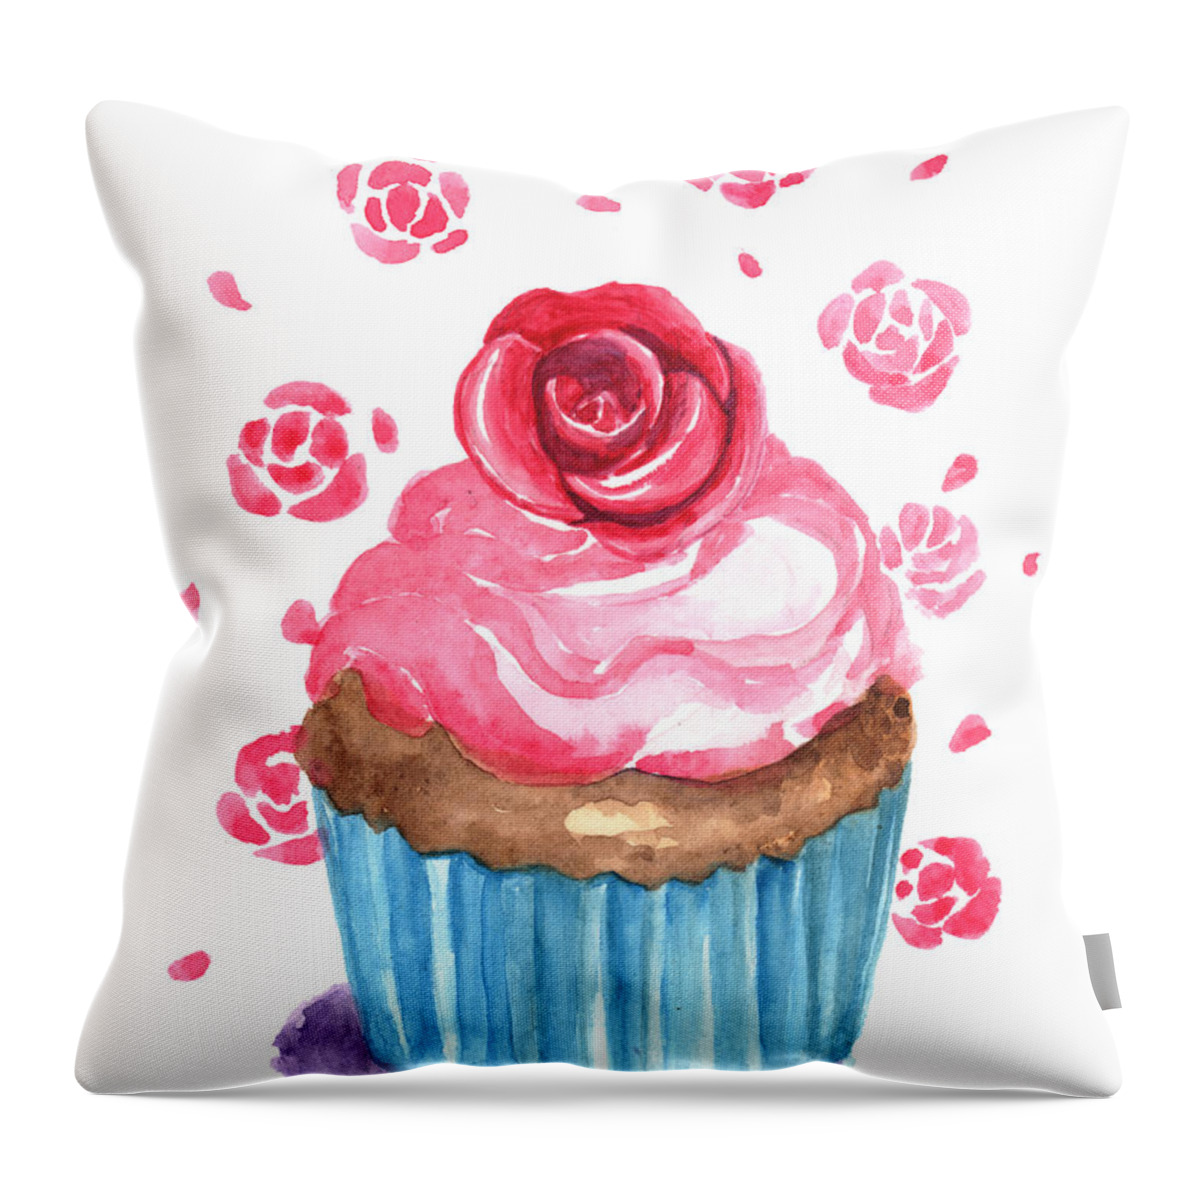 Art Throw Pillow featuring the photograph Rose Cup Cake Illustration by Kana hata